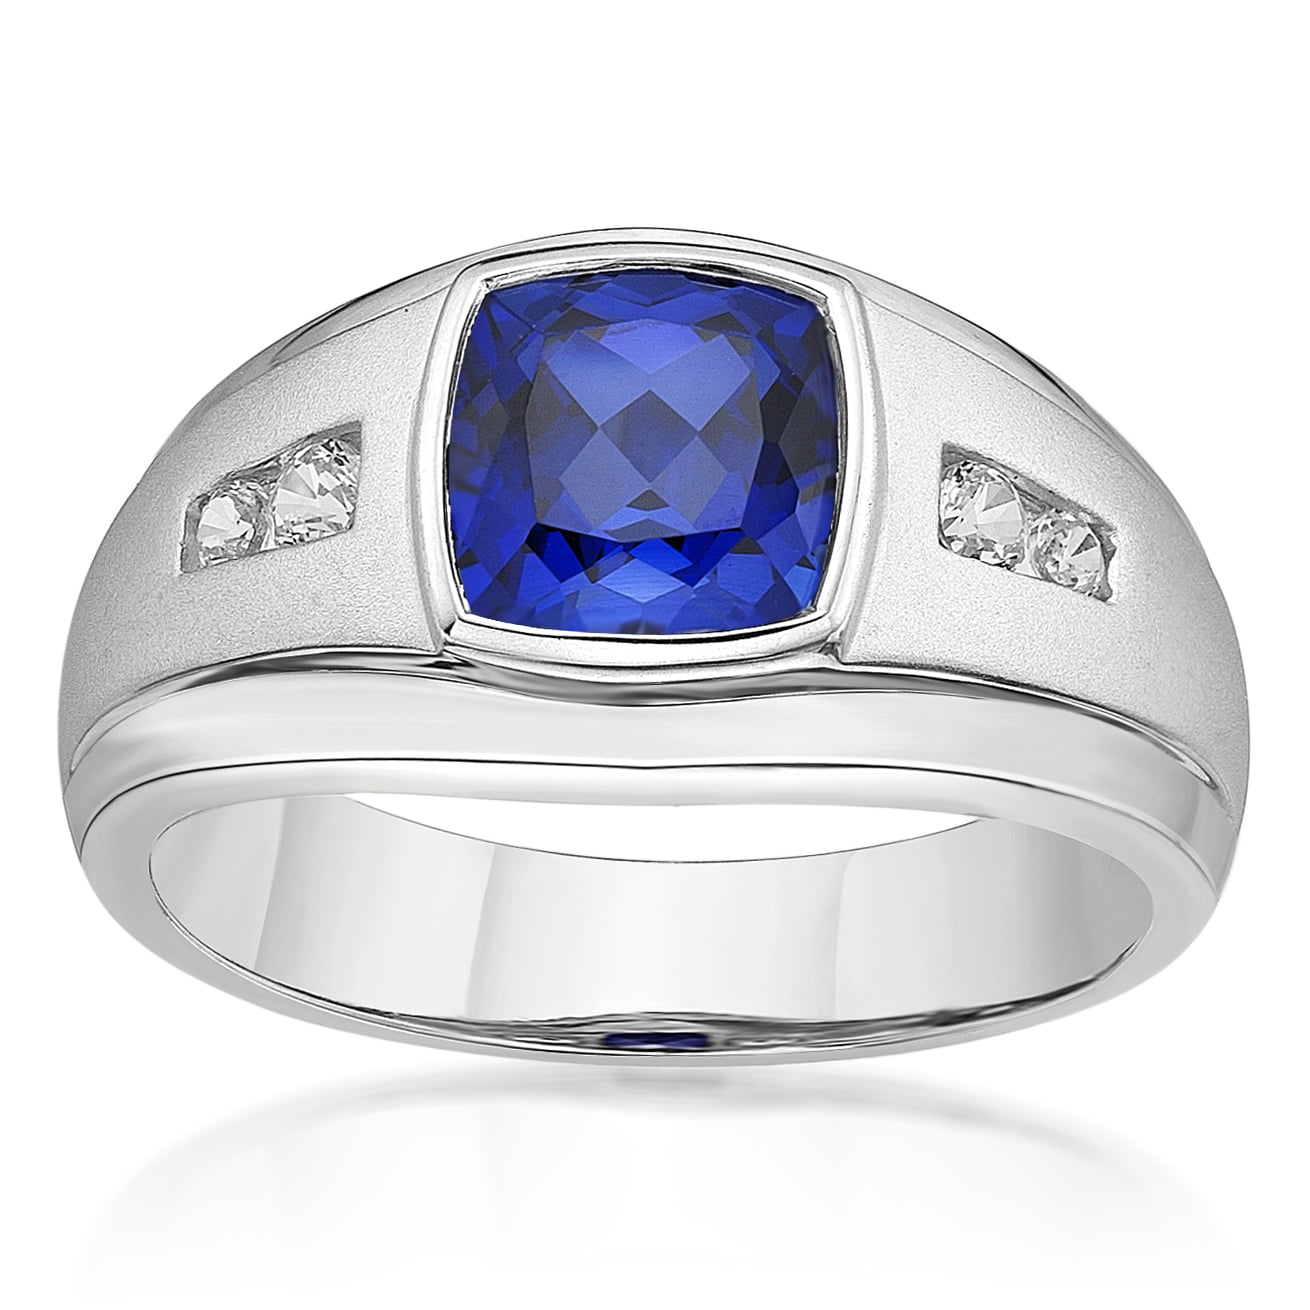 .925 sterling silver lab created Sapphire and,or CZ anniversary or wedding band 